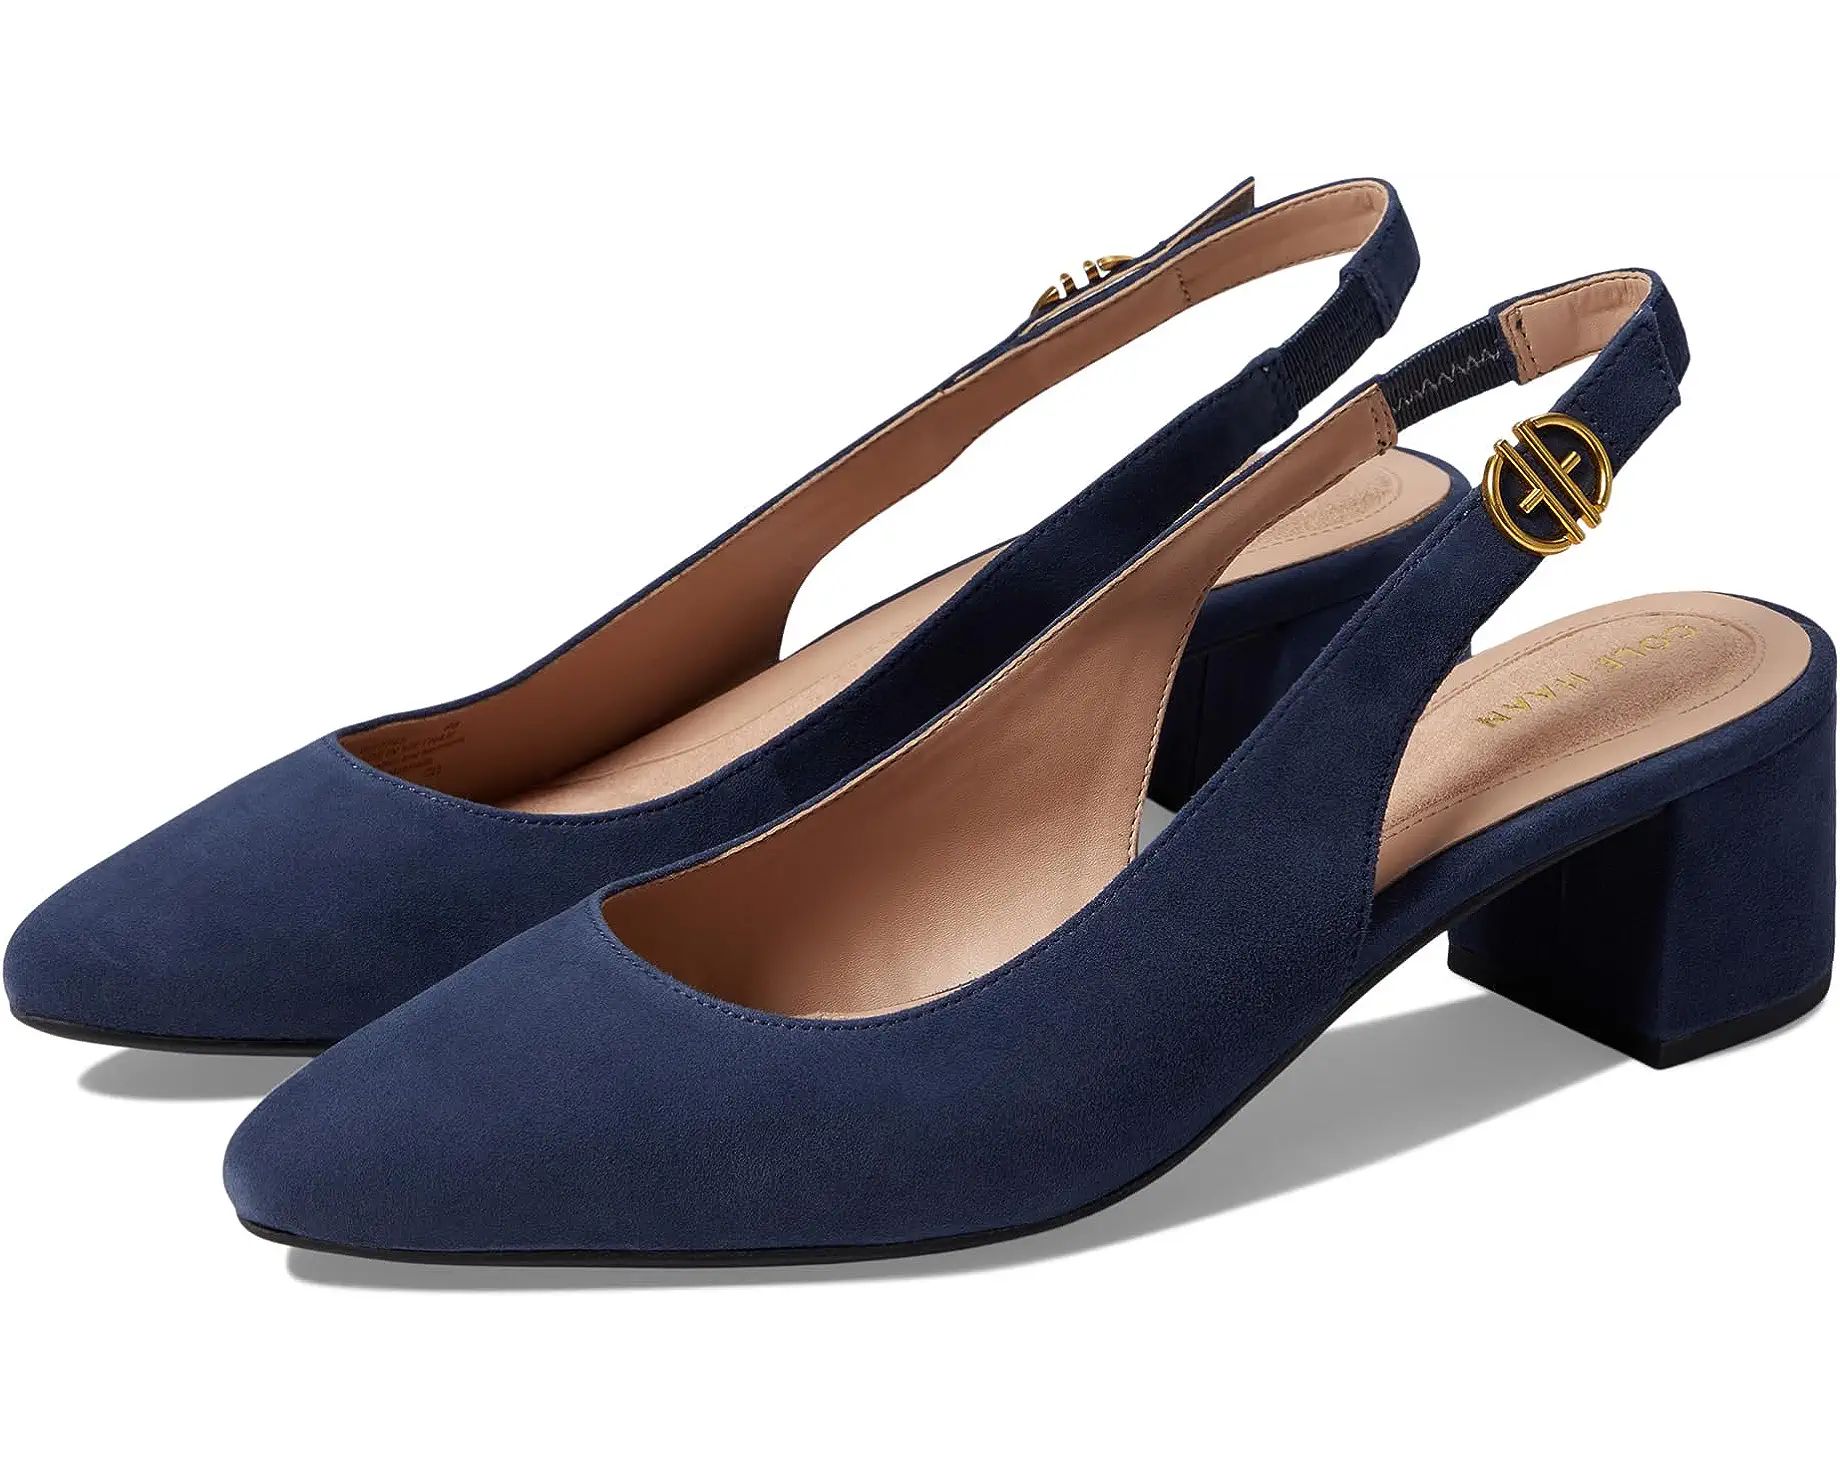 The Go-To Slingback Pump 45 mm | Zappos